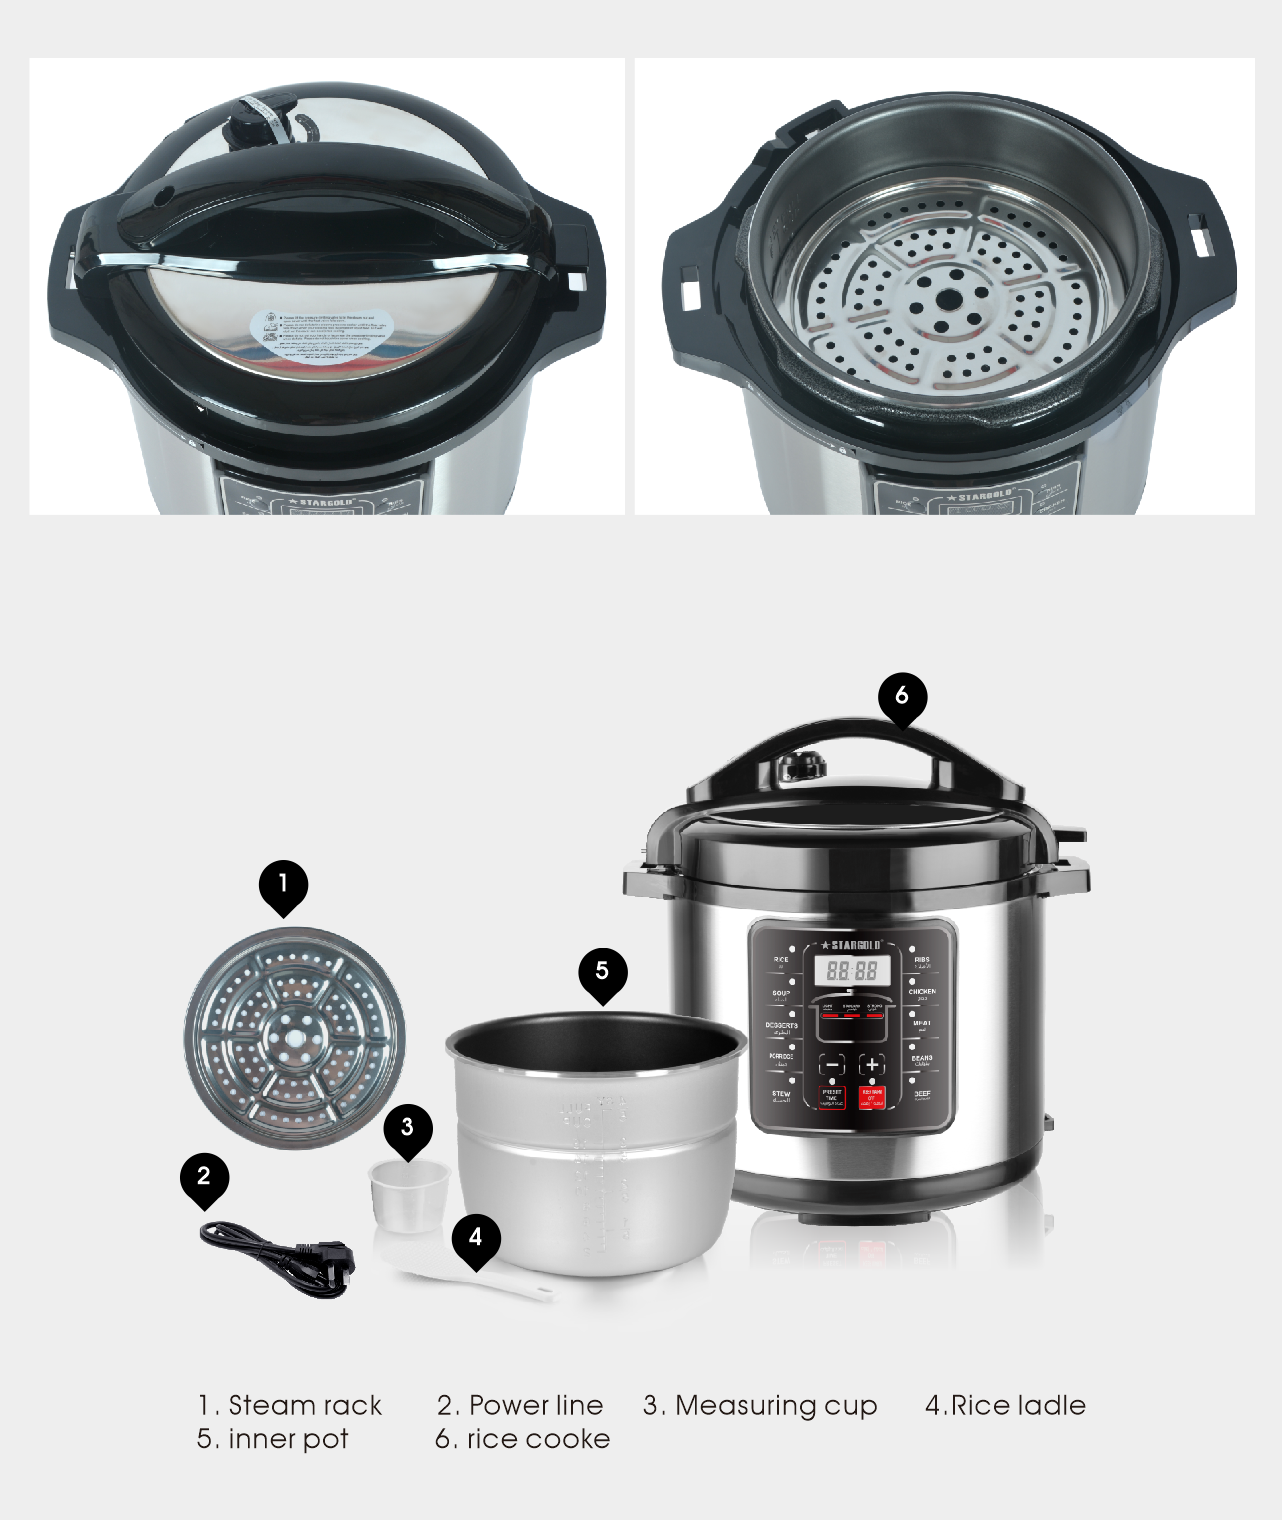 STARGOLD 10 In 1 Electric Pressure Cooker Stainless Steel Body, Touch Programmable, 8L Capacity. 1300 Watts, SG-338